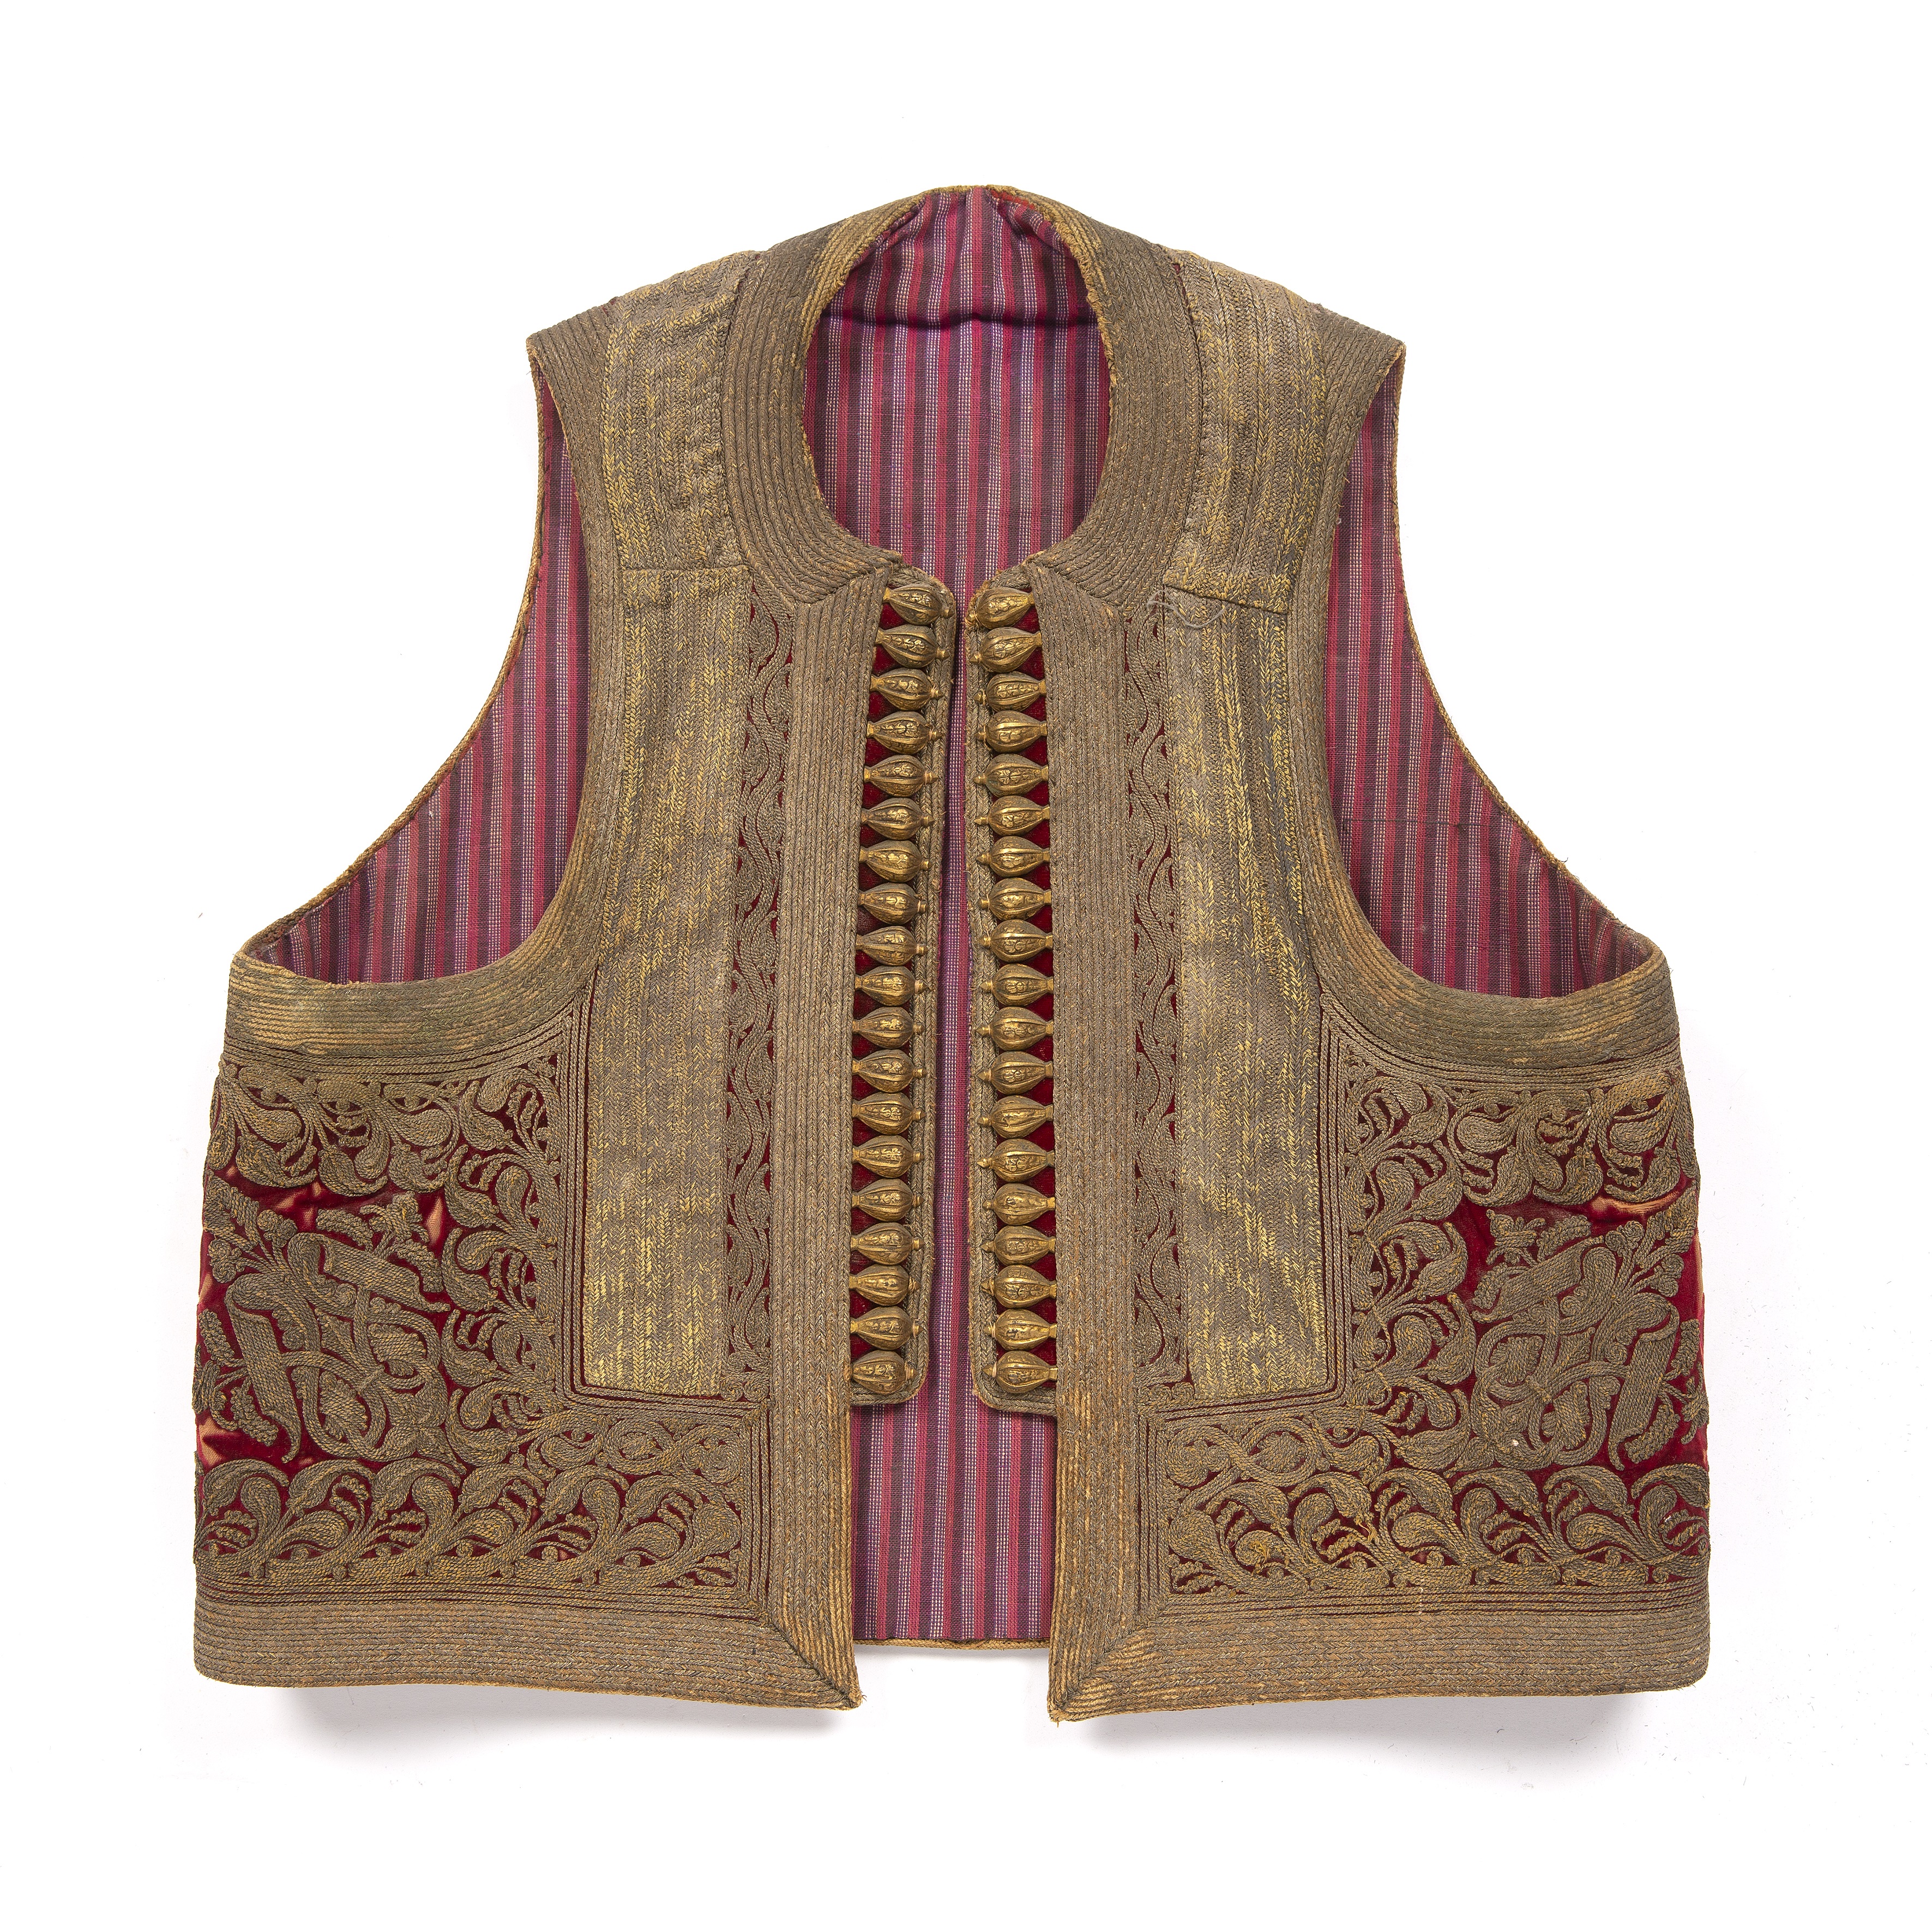 Velvet waistcoat Ottoman burgundy ground with deep gold embroidery, the embroidery in the form of